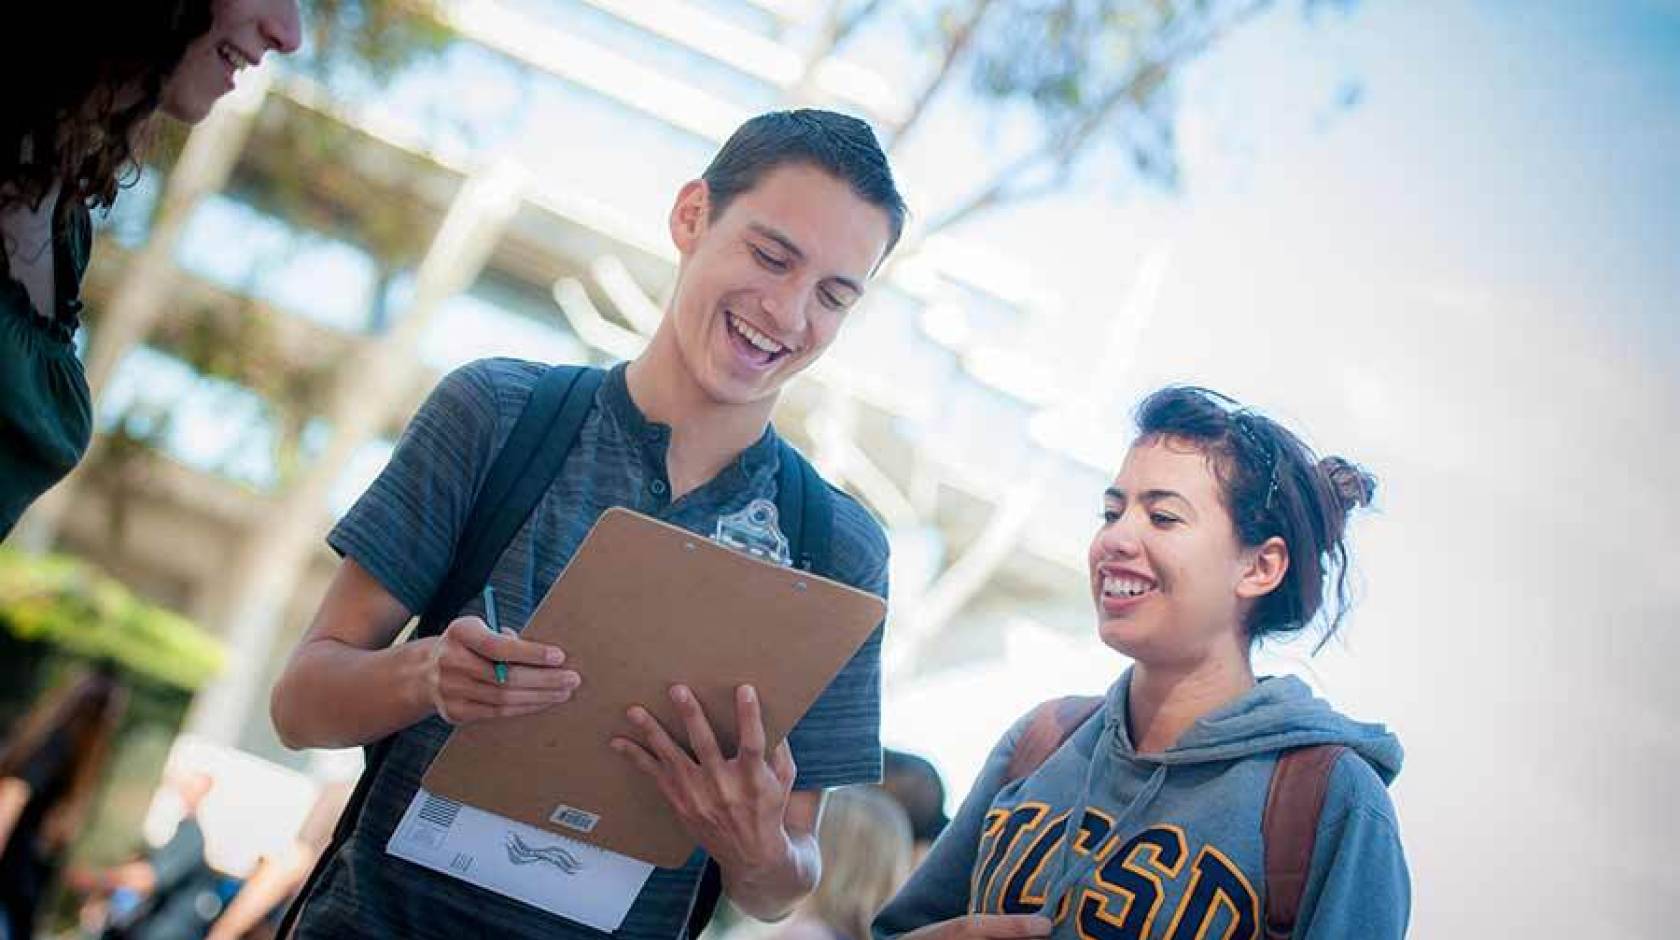 UC San Diego students at a 2018 voter registration drive.